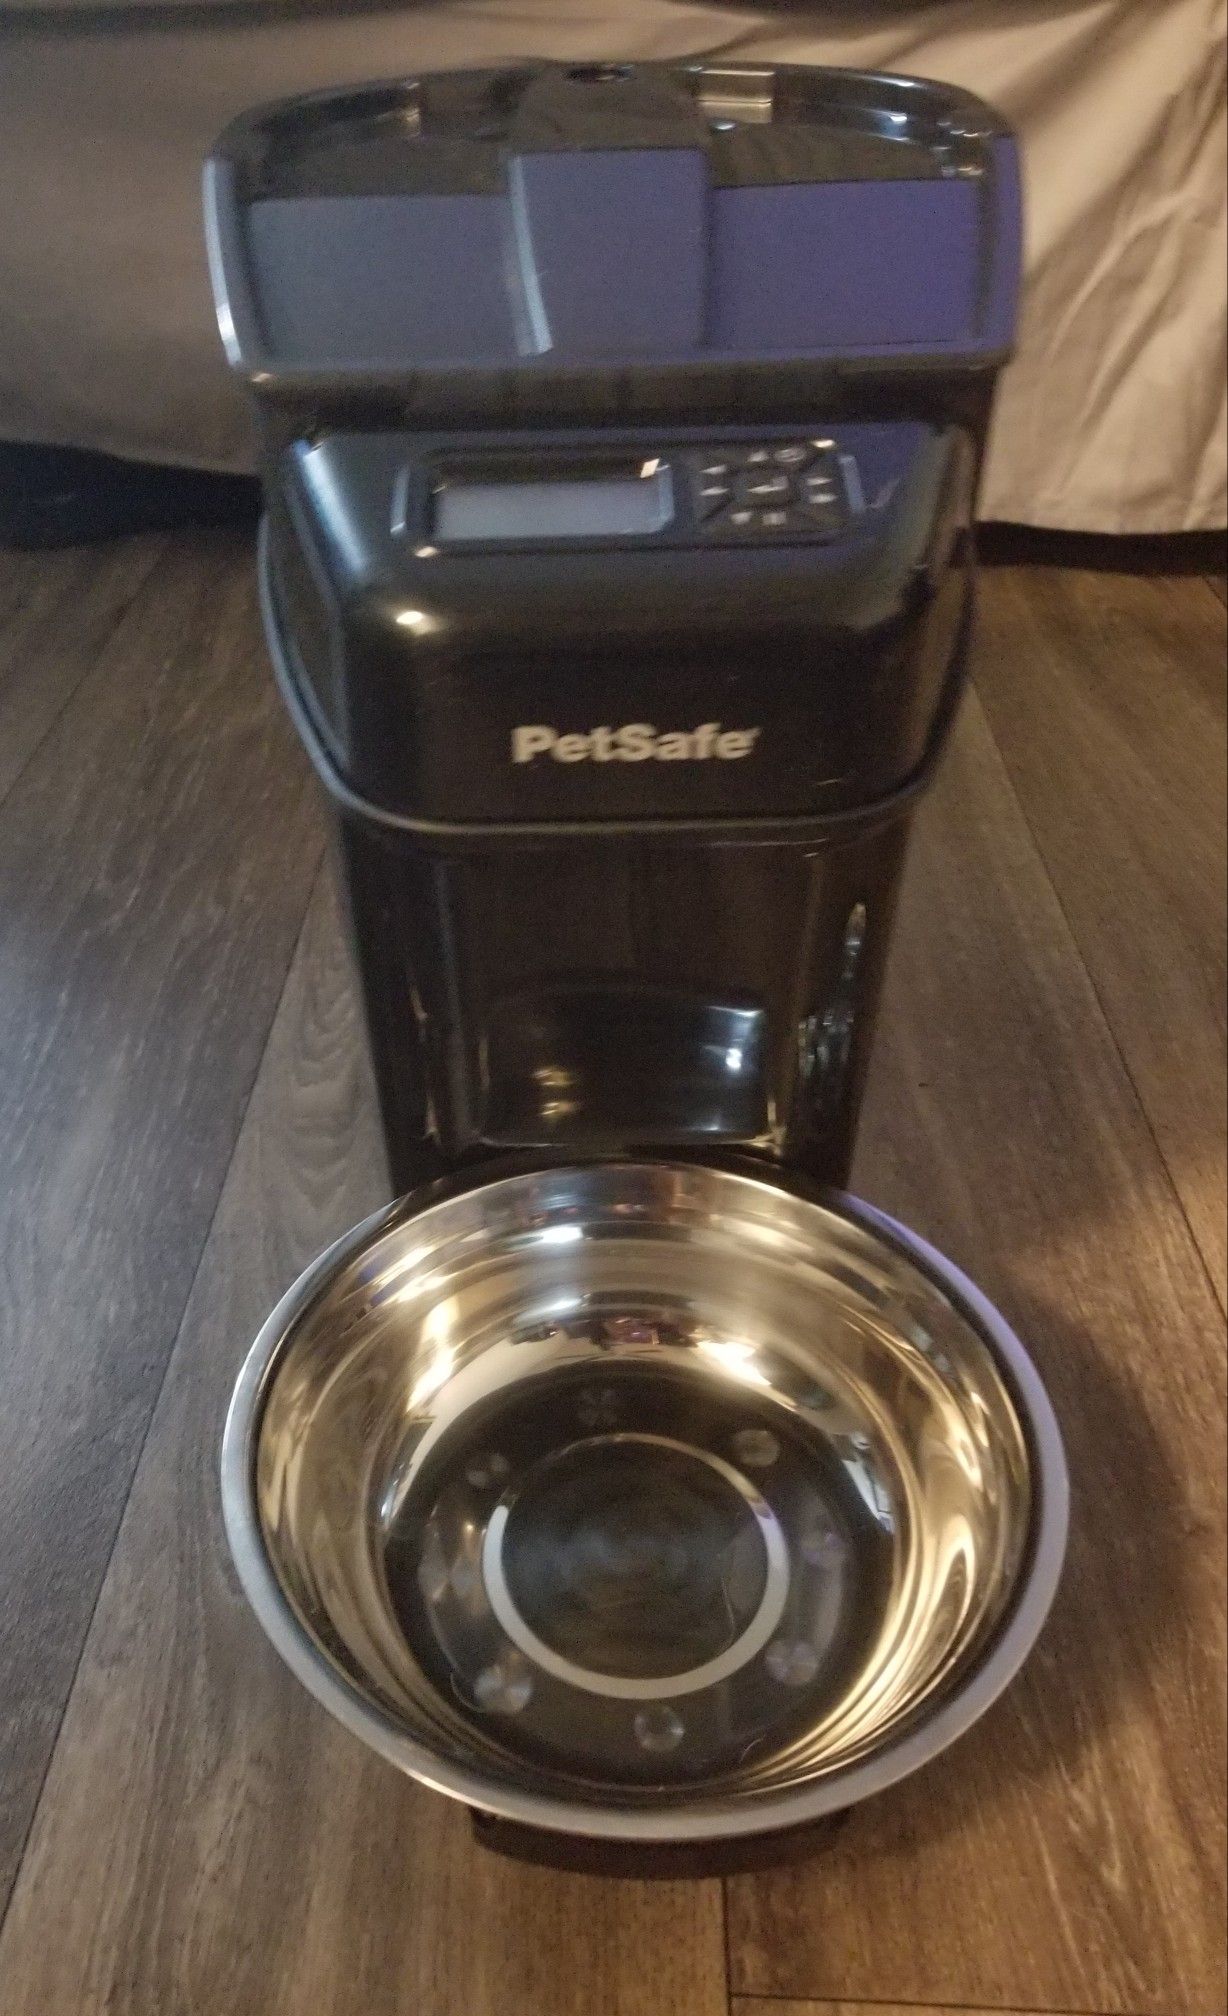 Used once- Petsafe Healthy Pet Simply Feed automatic feeder